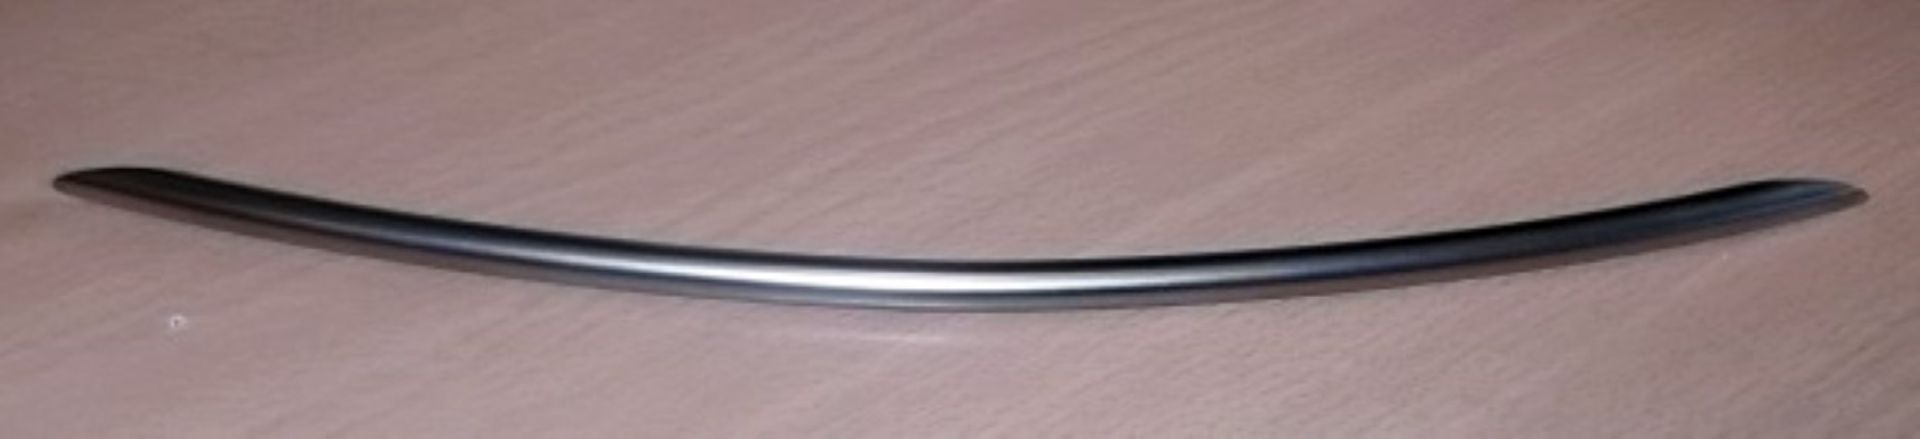 250 x BOW Handle Kitchen Door Handles - 320mm - New Stock - Brushed Nickel Finish - Fixings Included - Image 7 of 20